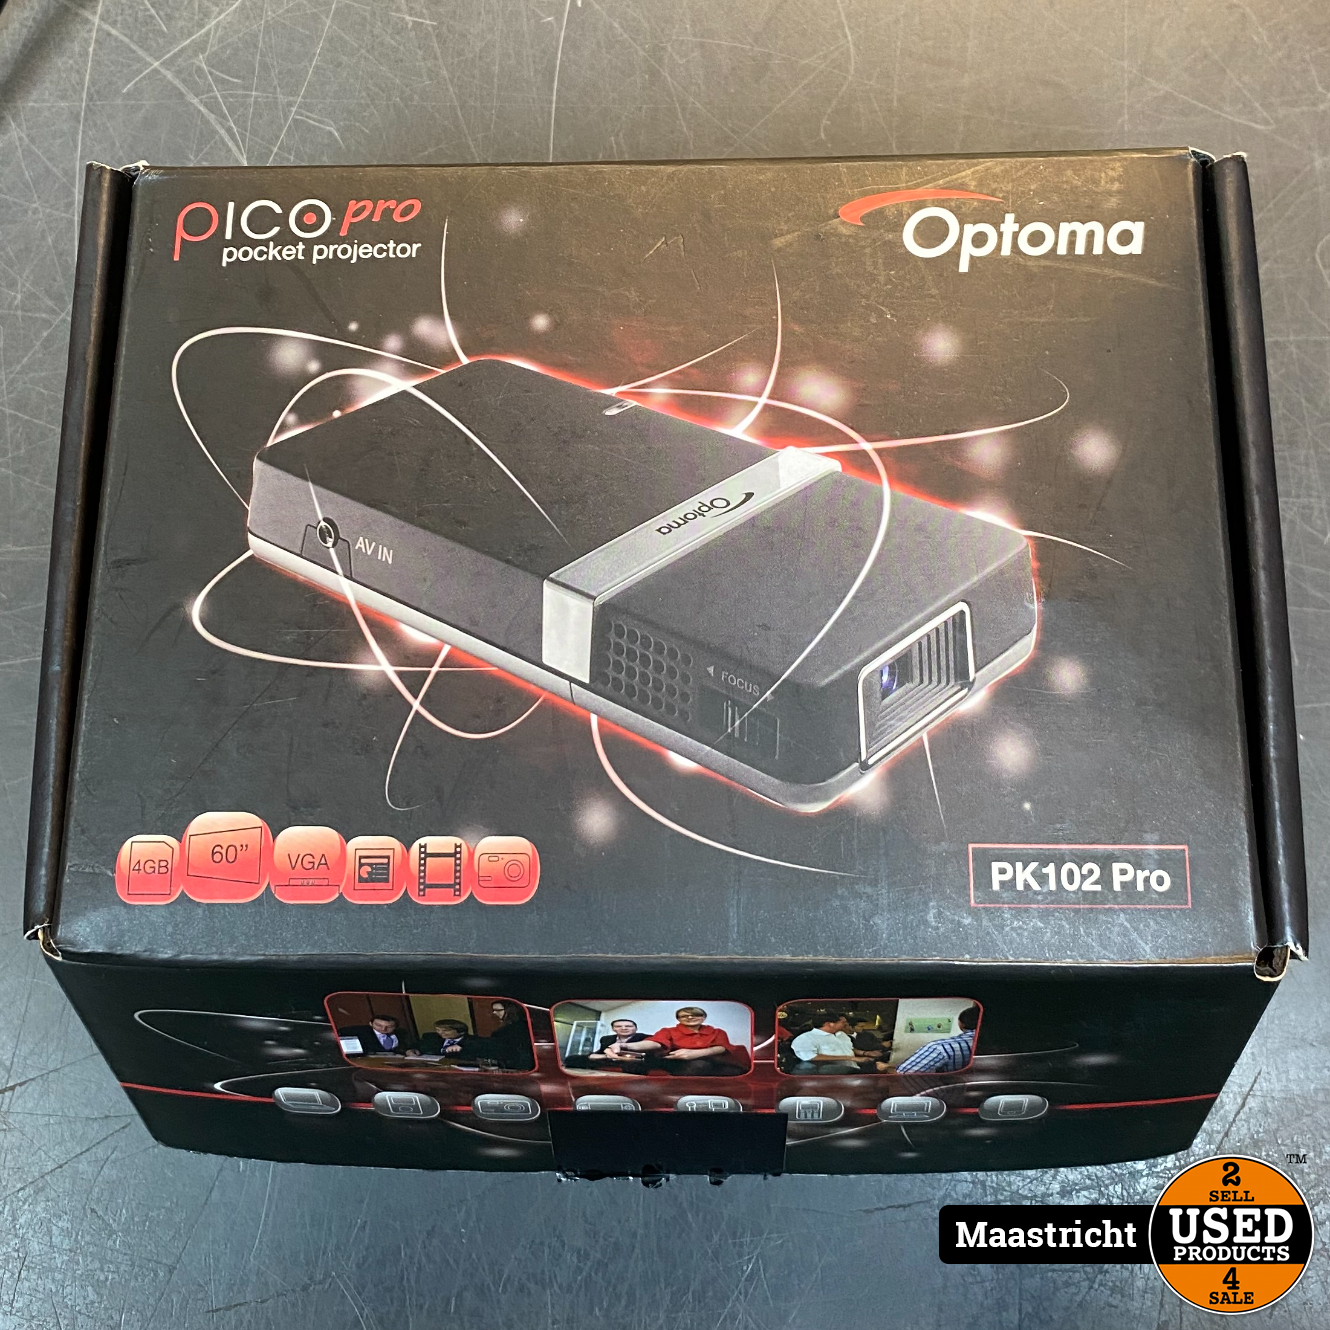 Optoma Pro- Pocket projector Pro) Used Products Maastricht